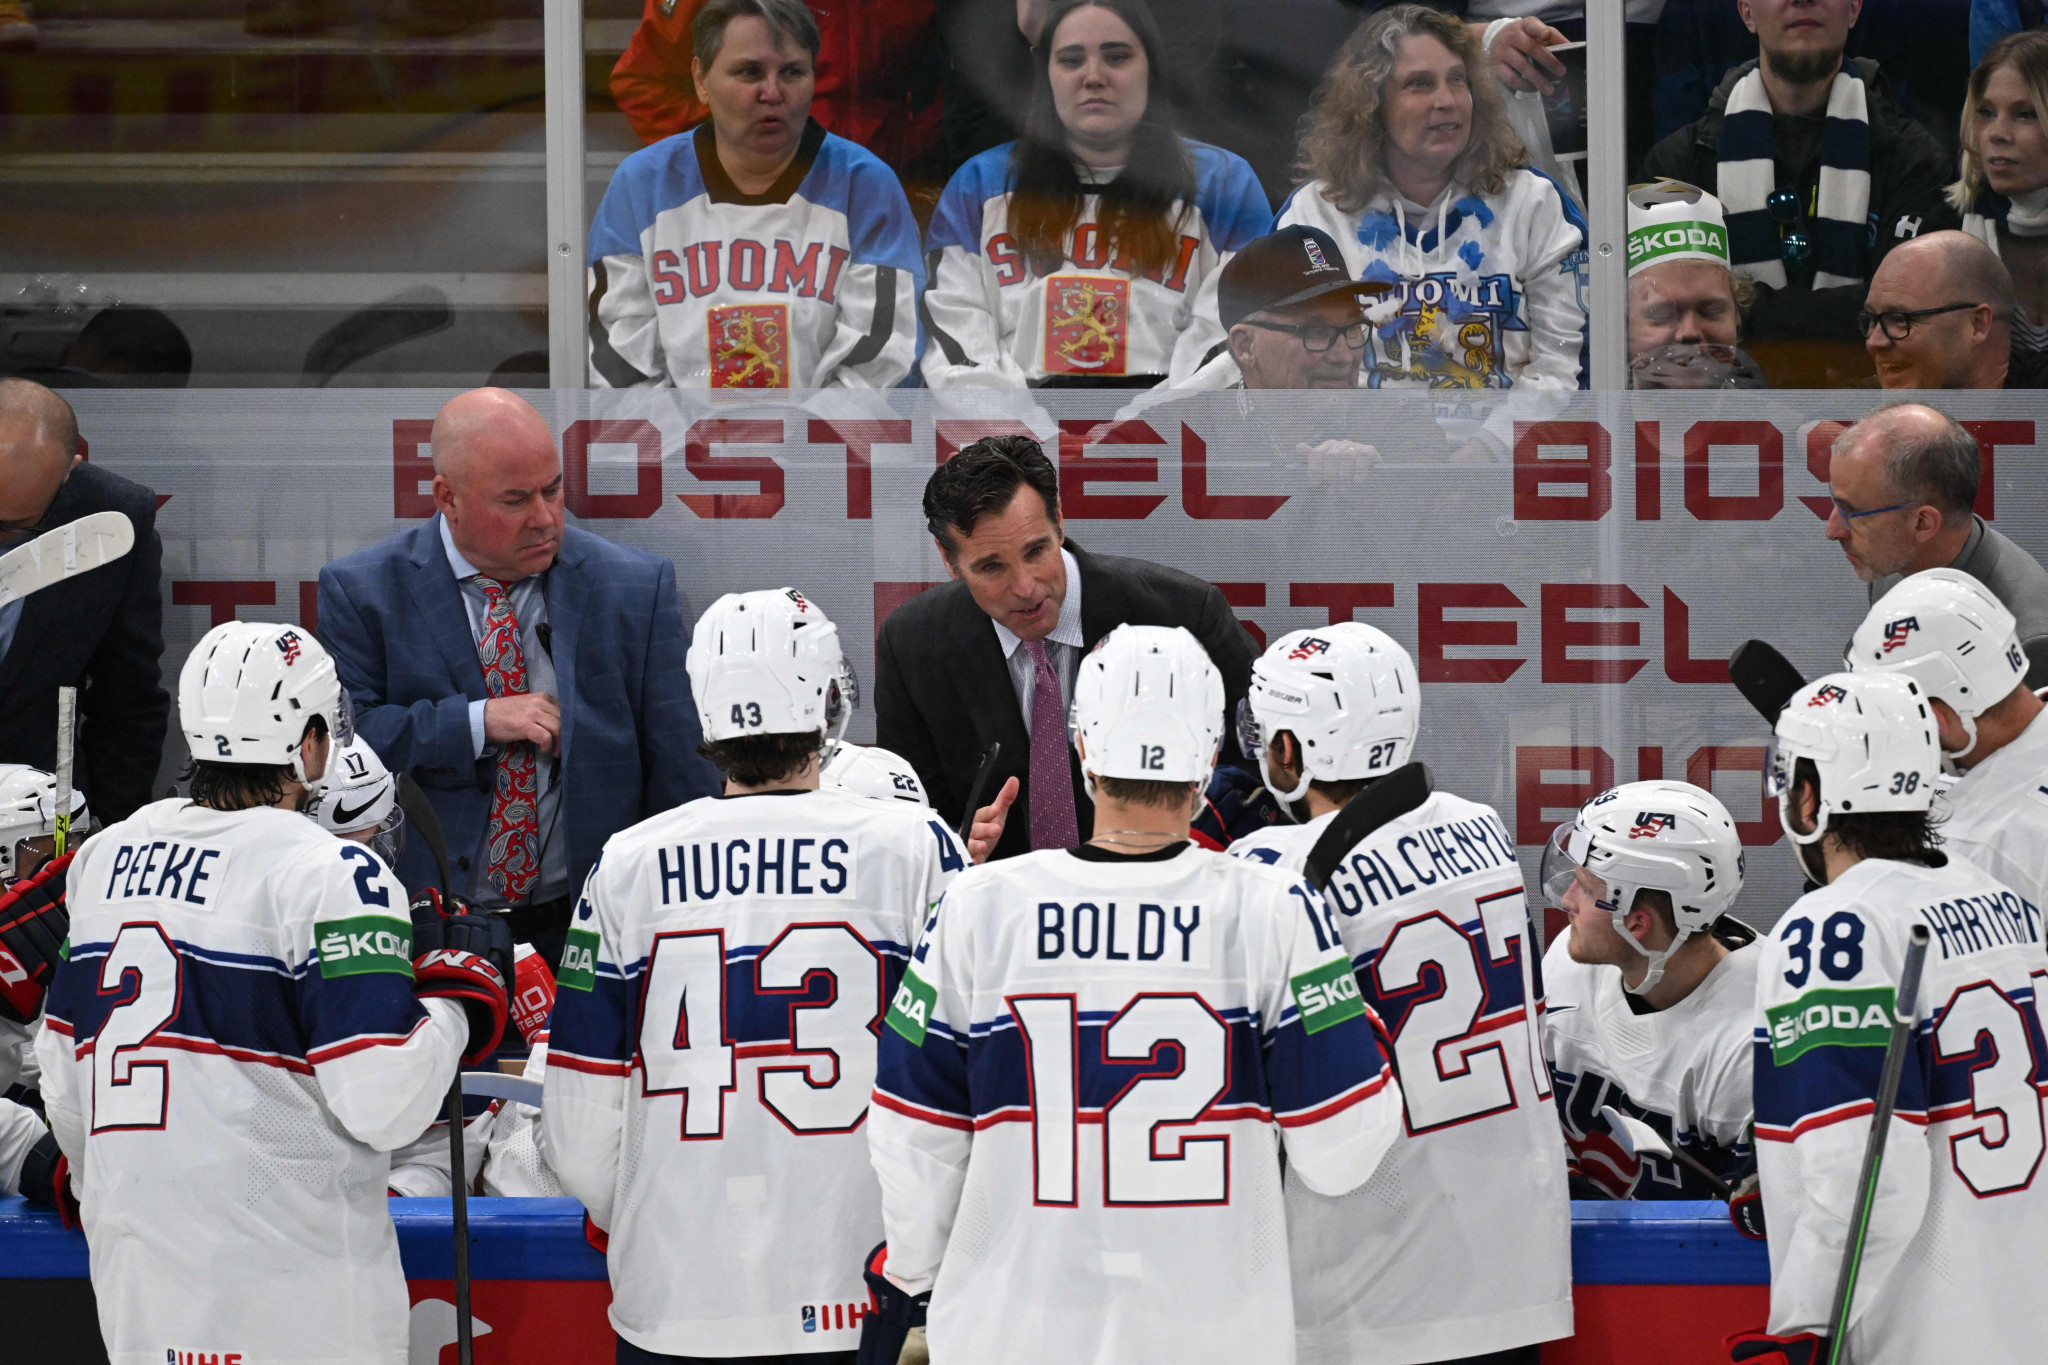 United States won a second successive match at the Ice Hockey World Championship, beating Hungary 7-1 ©Getty Images